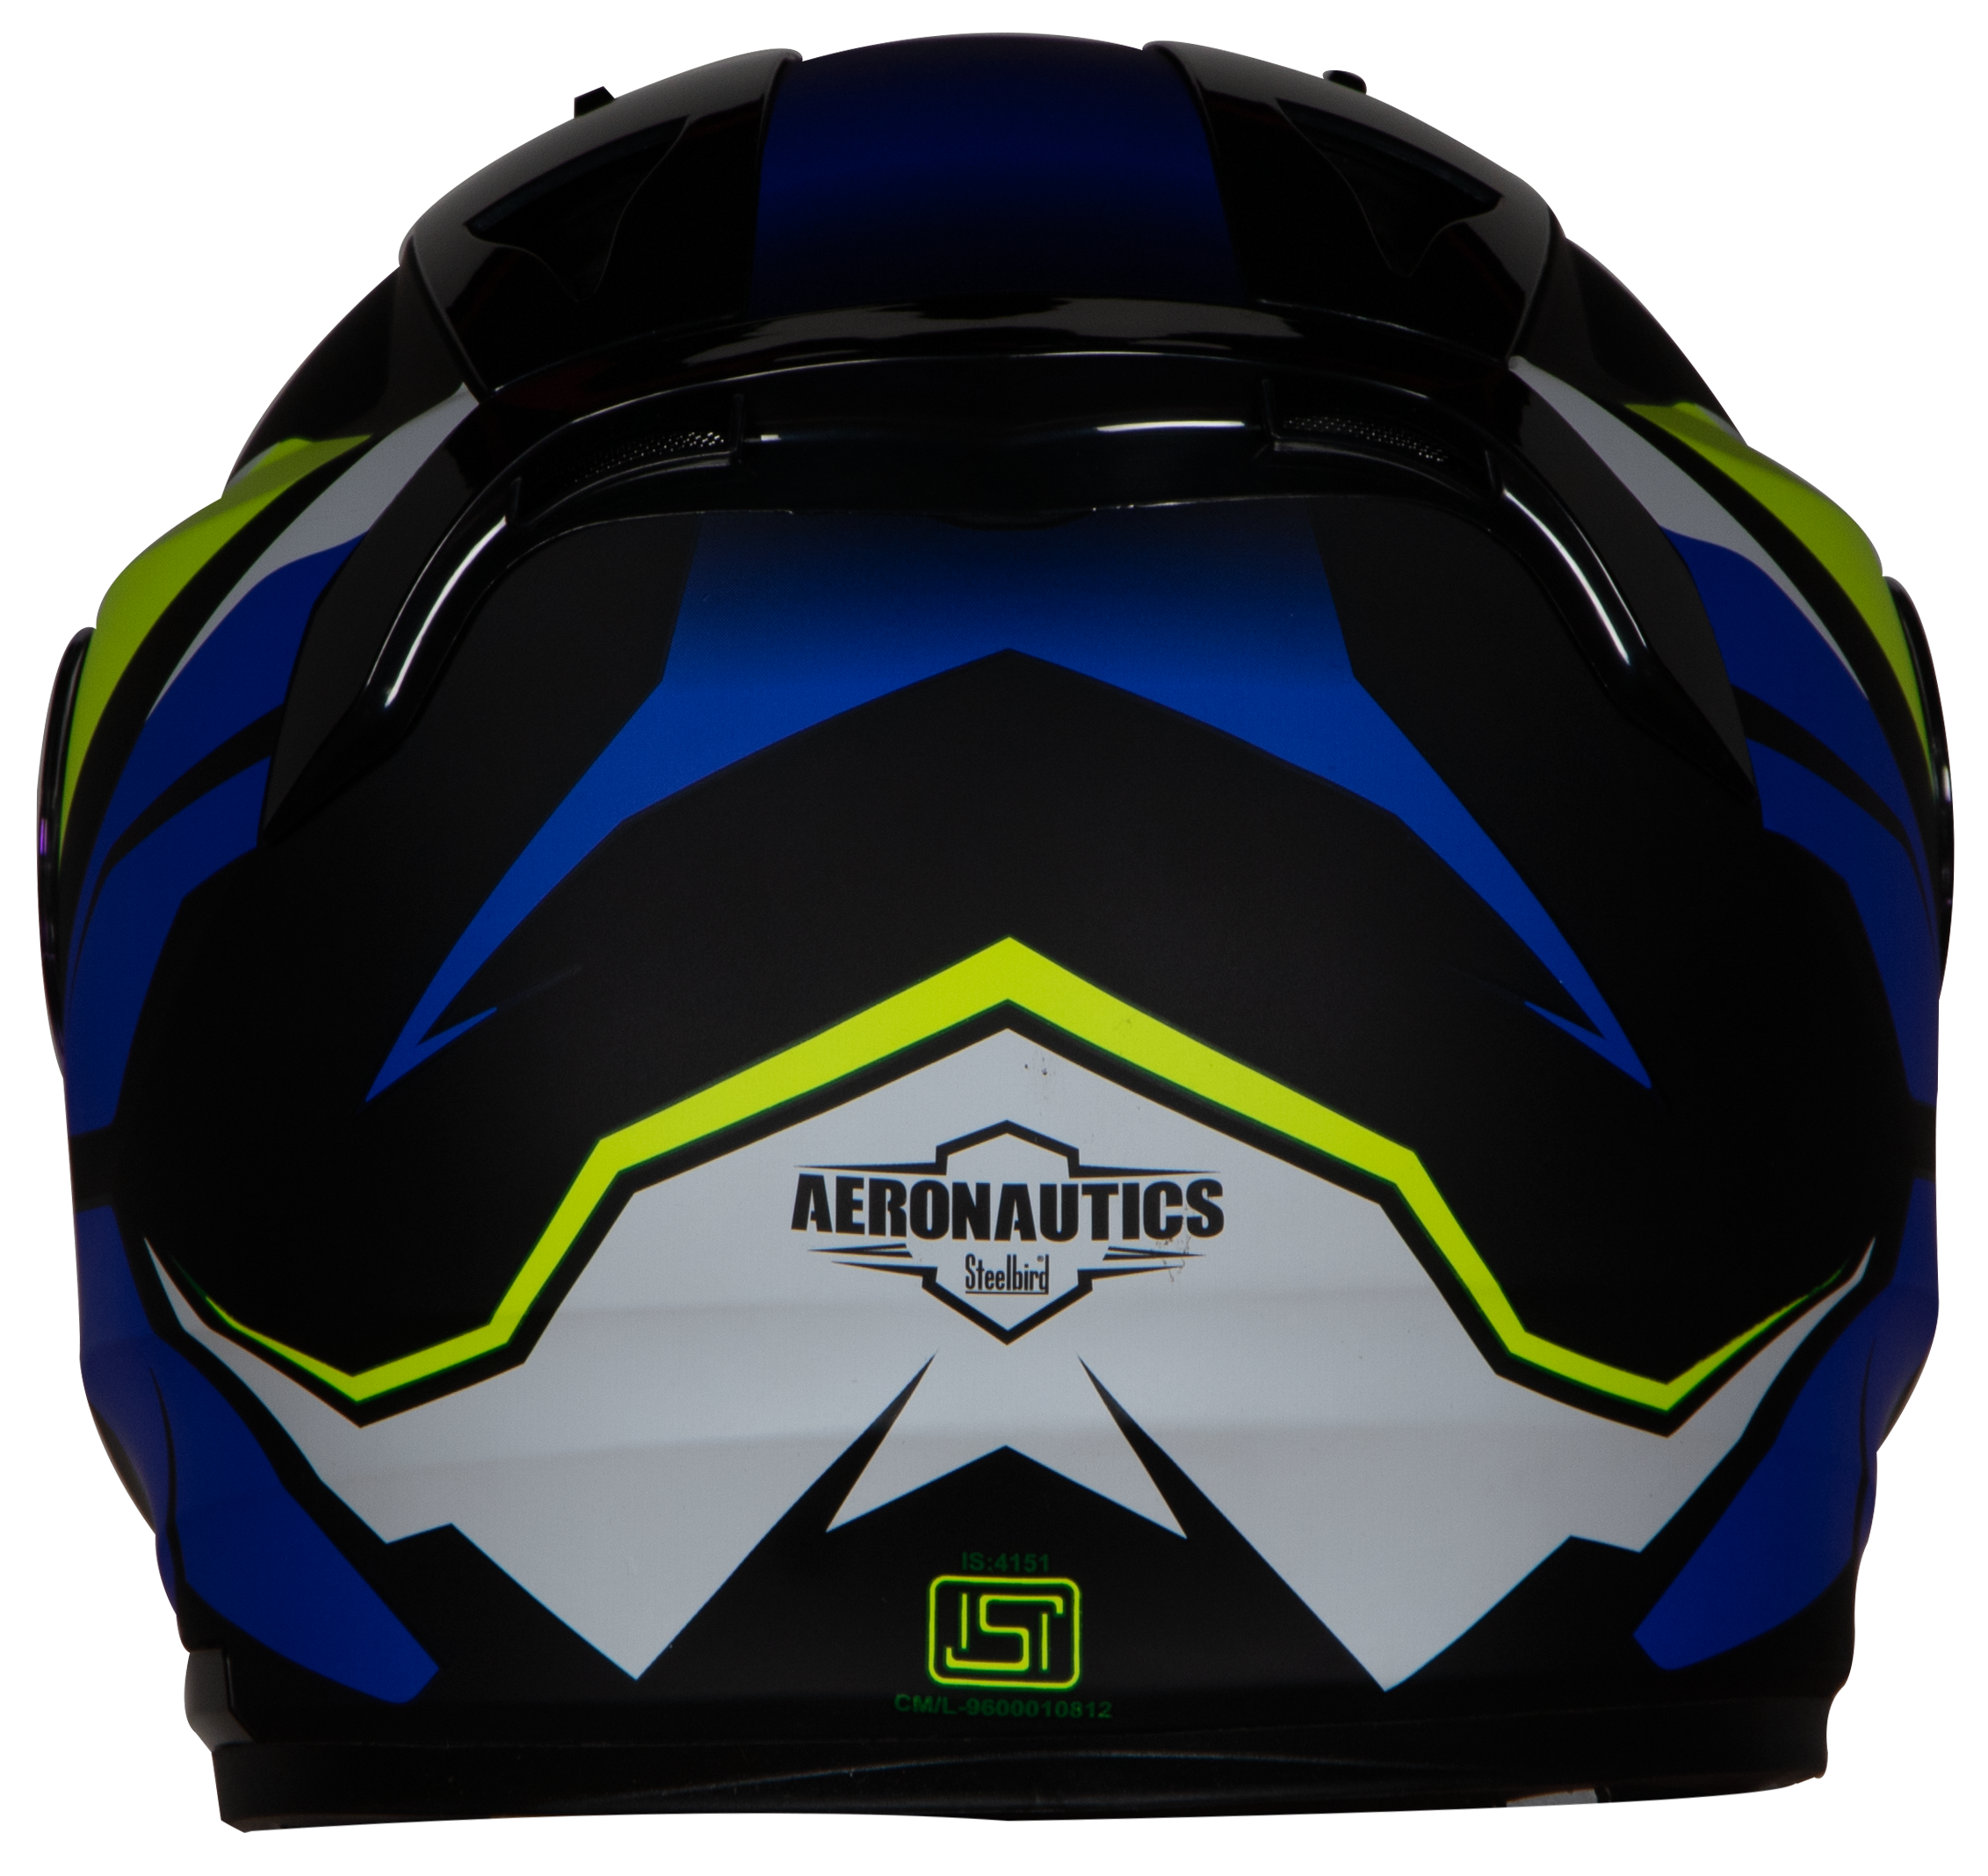 SA-1 Aviate Mat Black With Blue (Fitted With Clear Visor Extra Blue Chrome Visor Free)